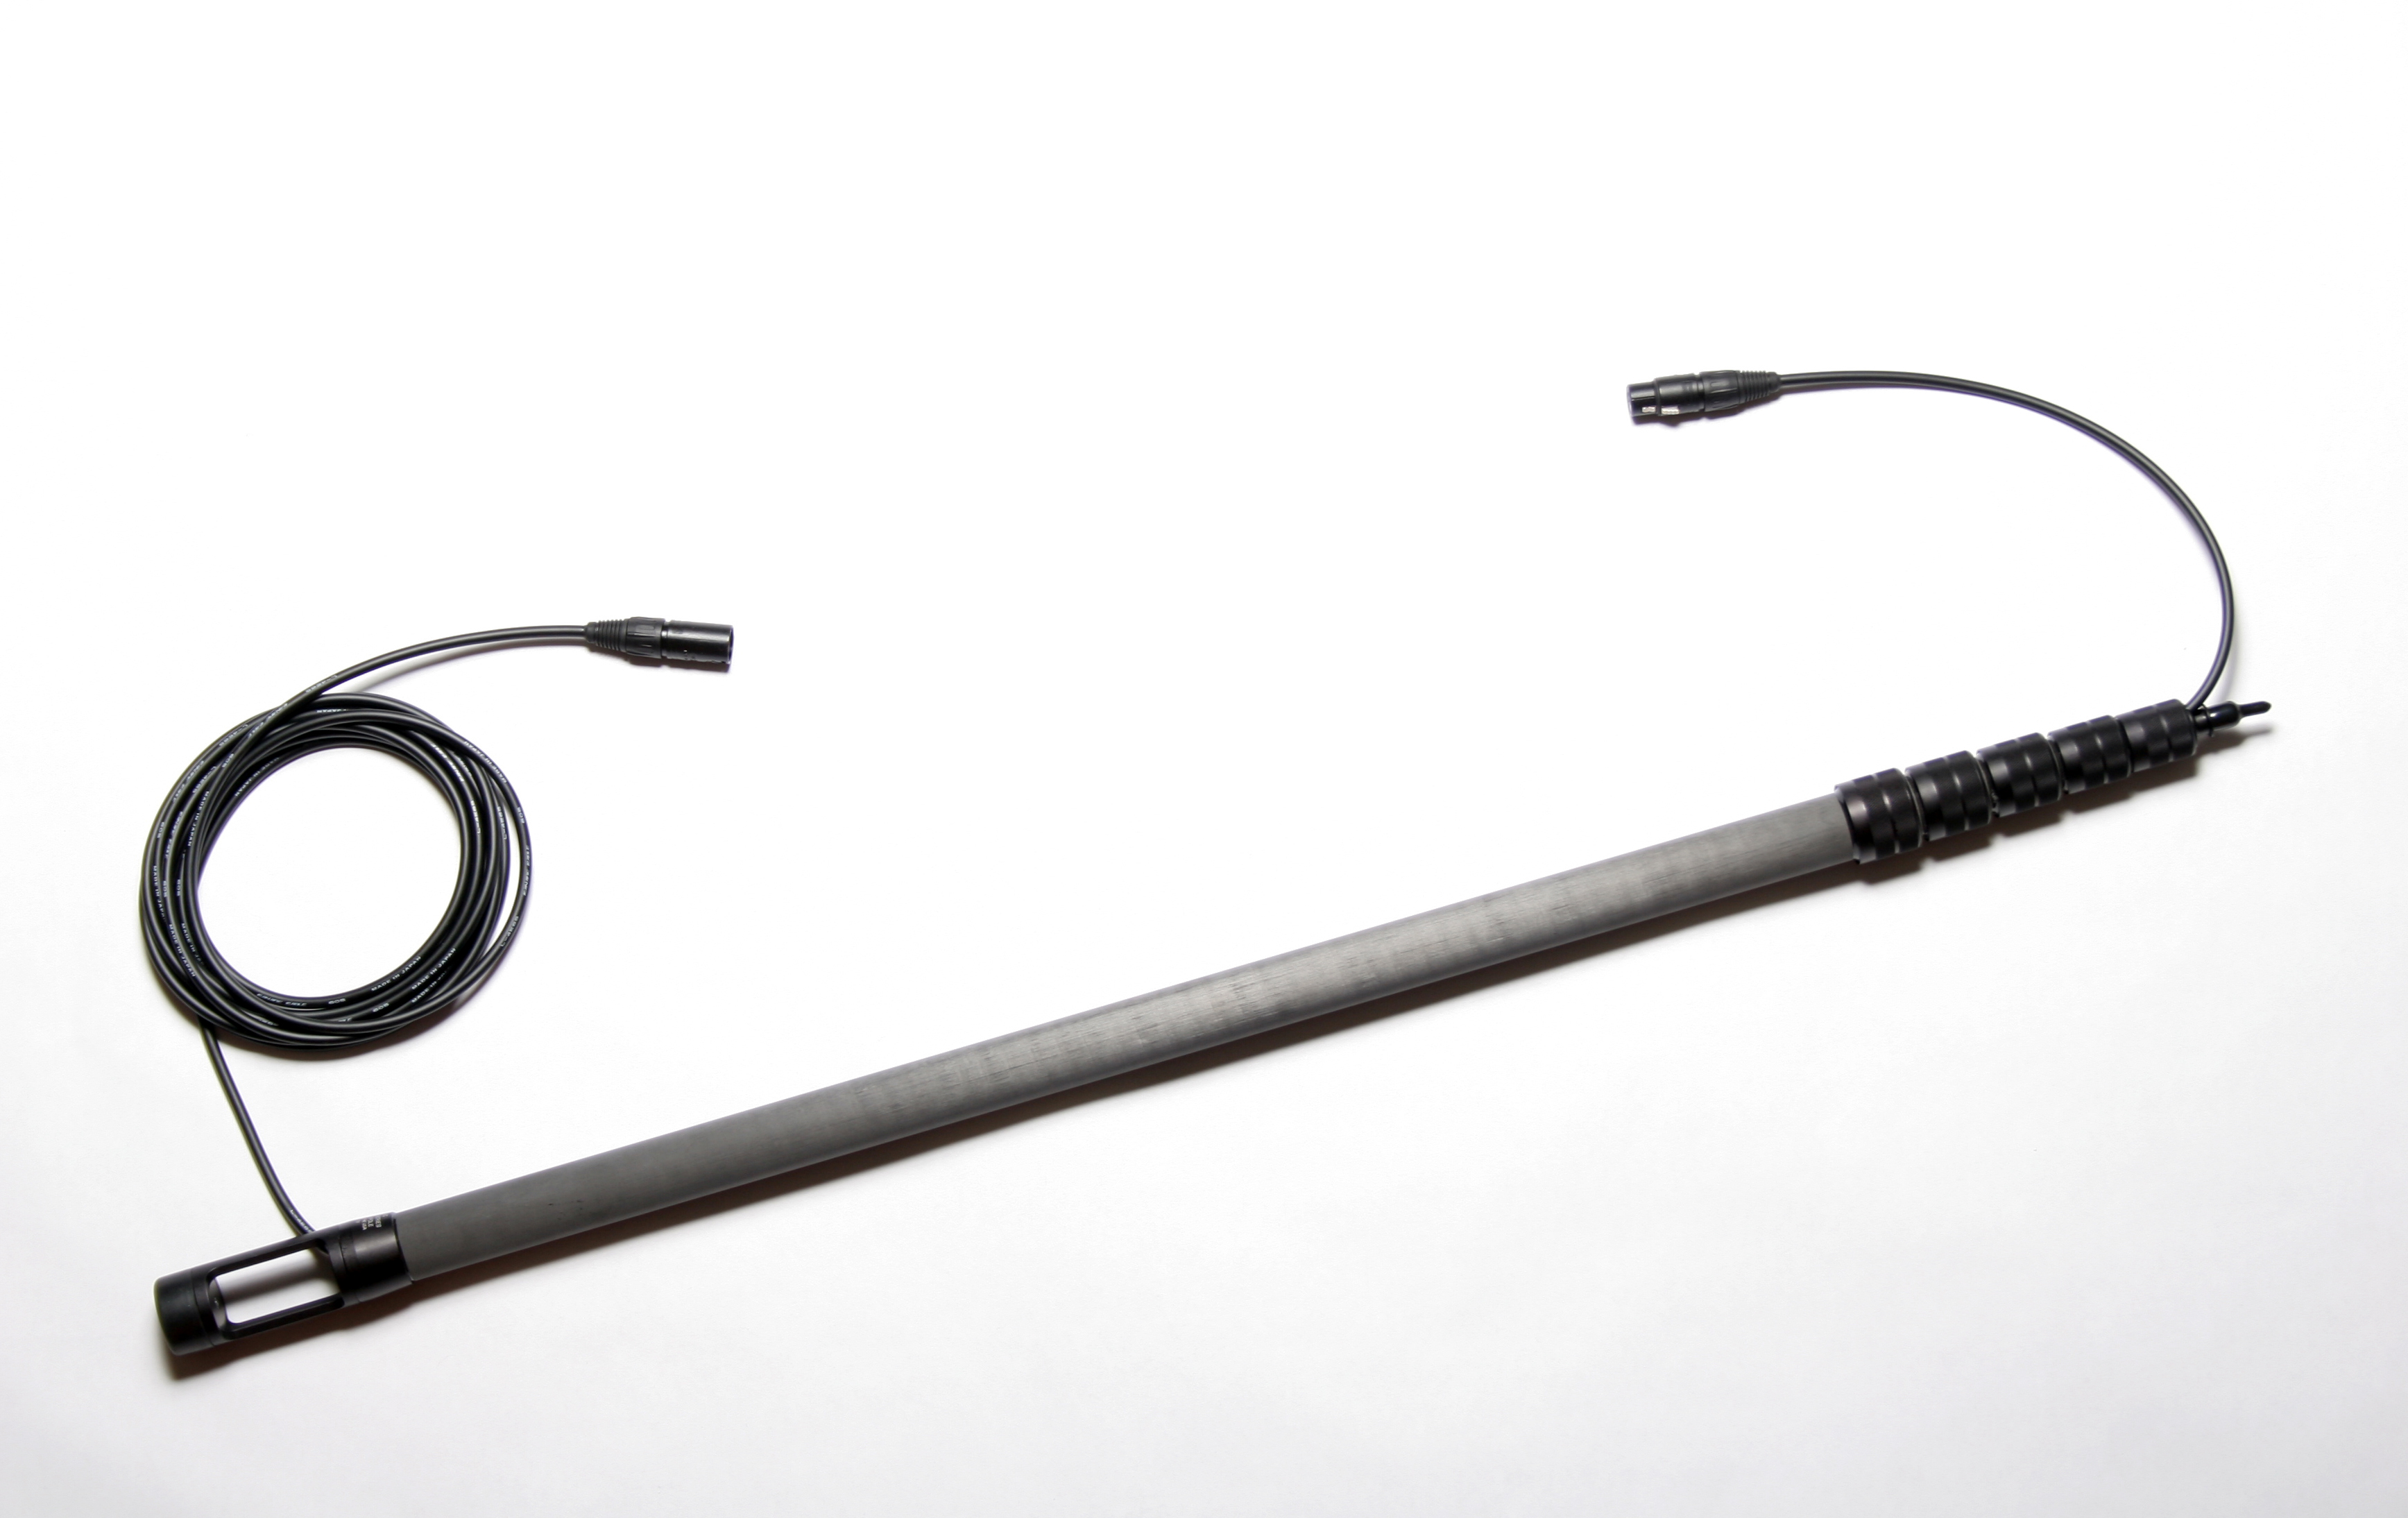 Large PSC Elite Boom Pole with straight cable